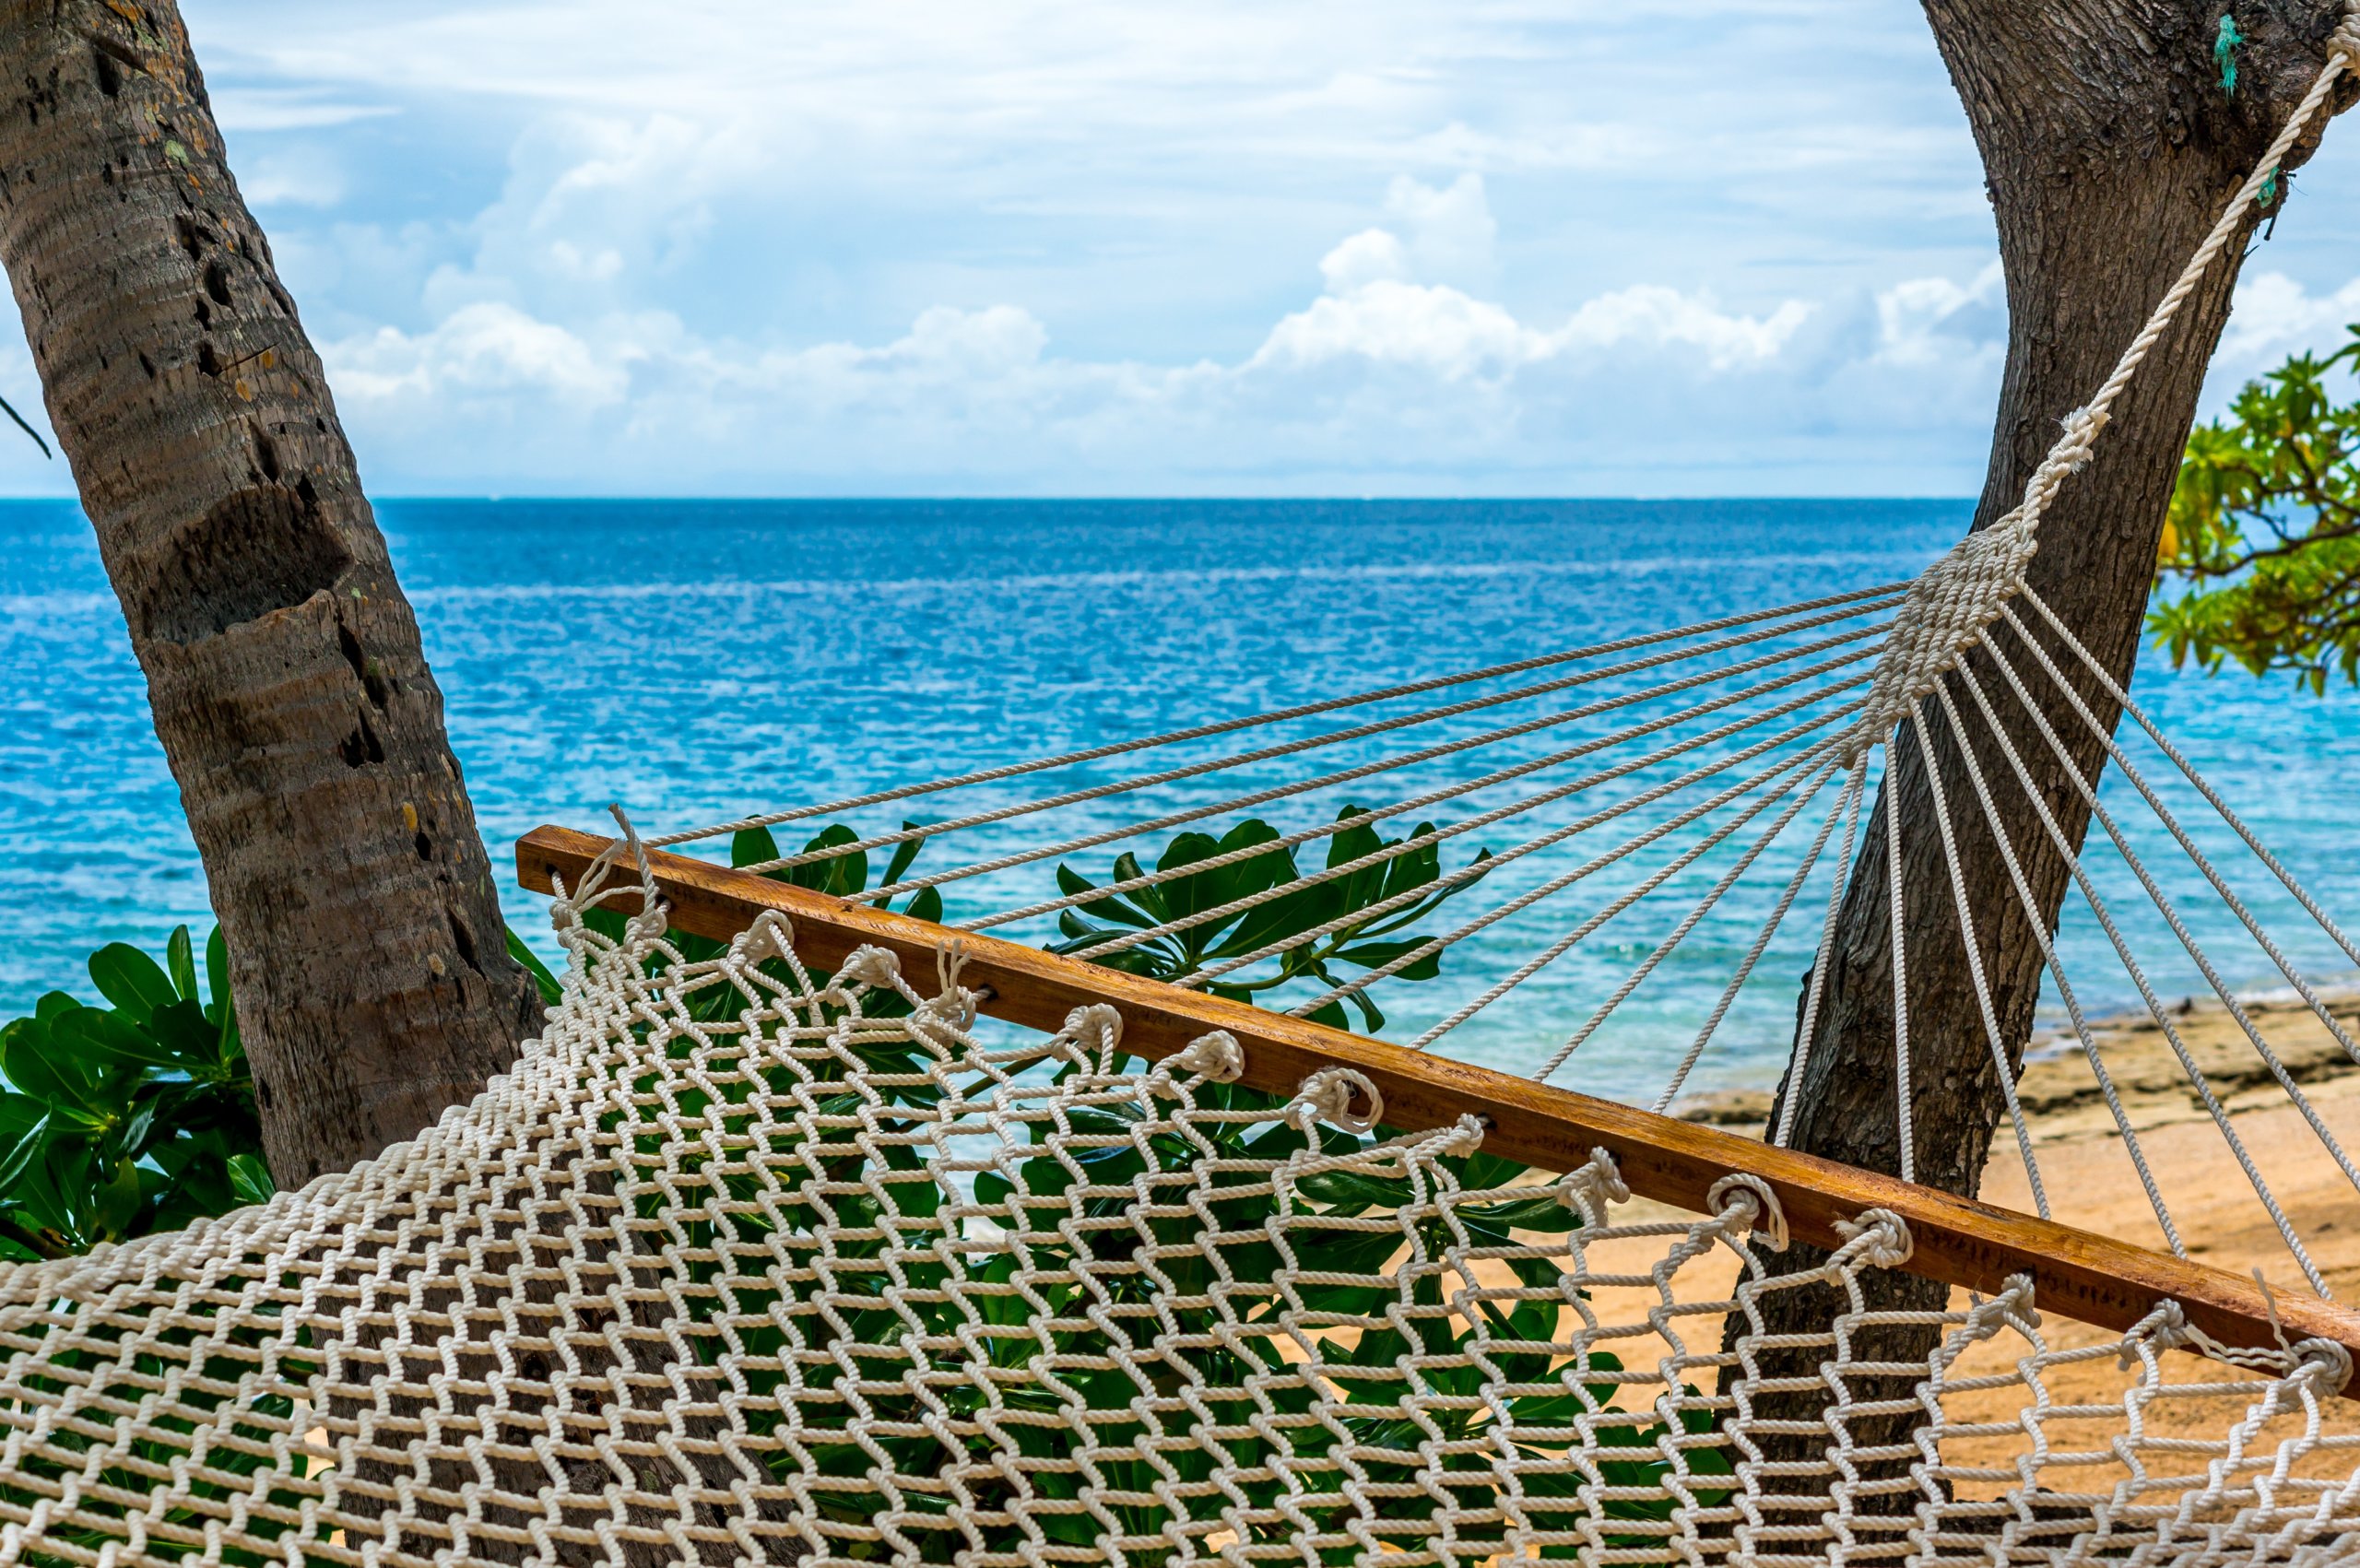 Larg hammock in front of blue water, sand, and palm trees